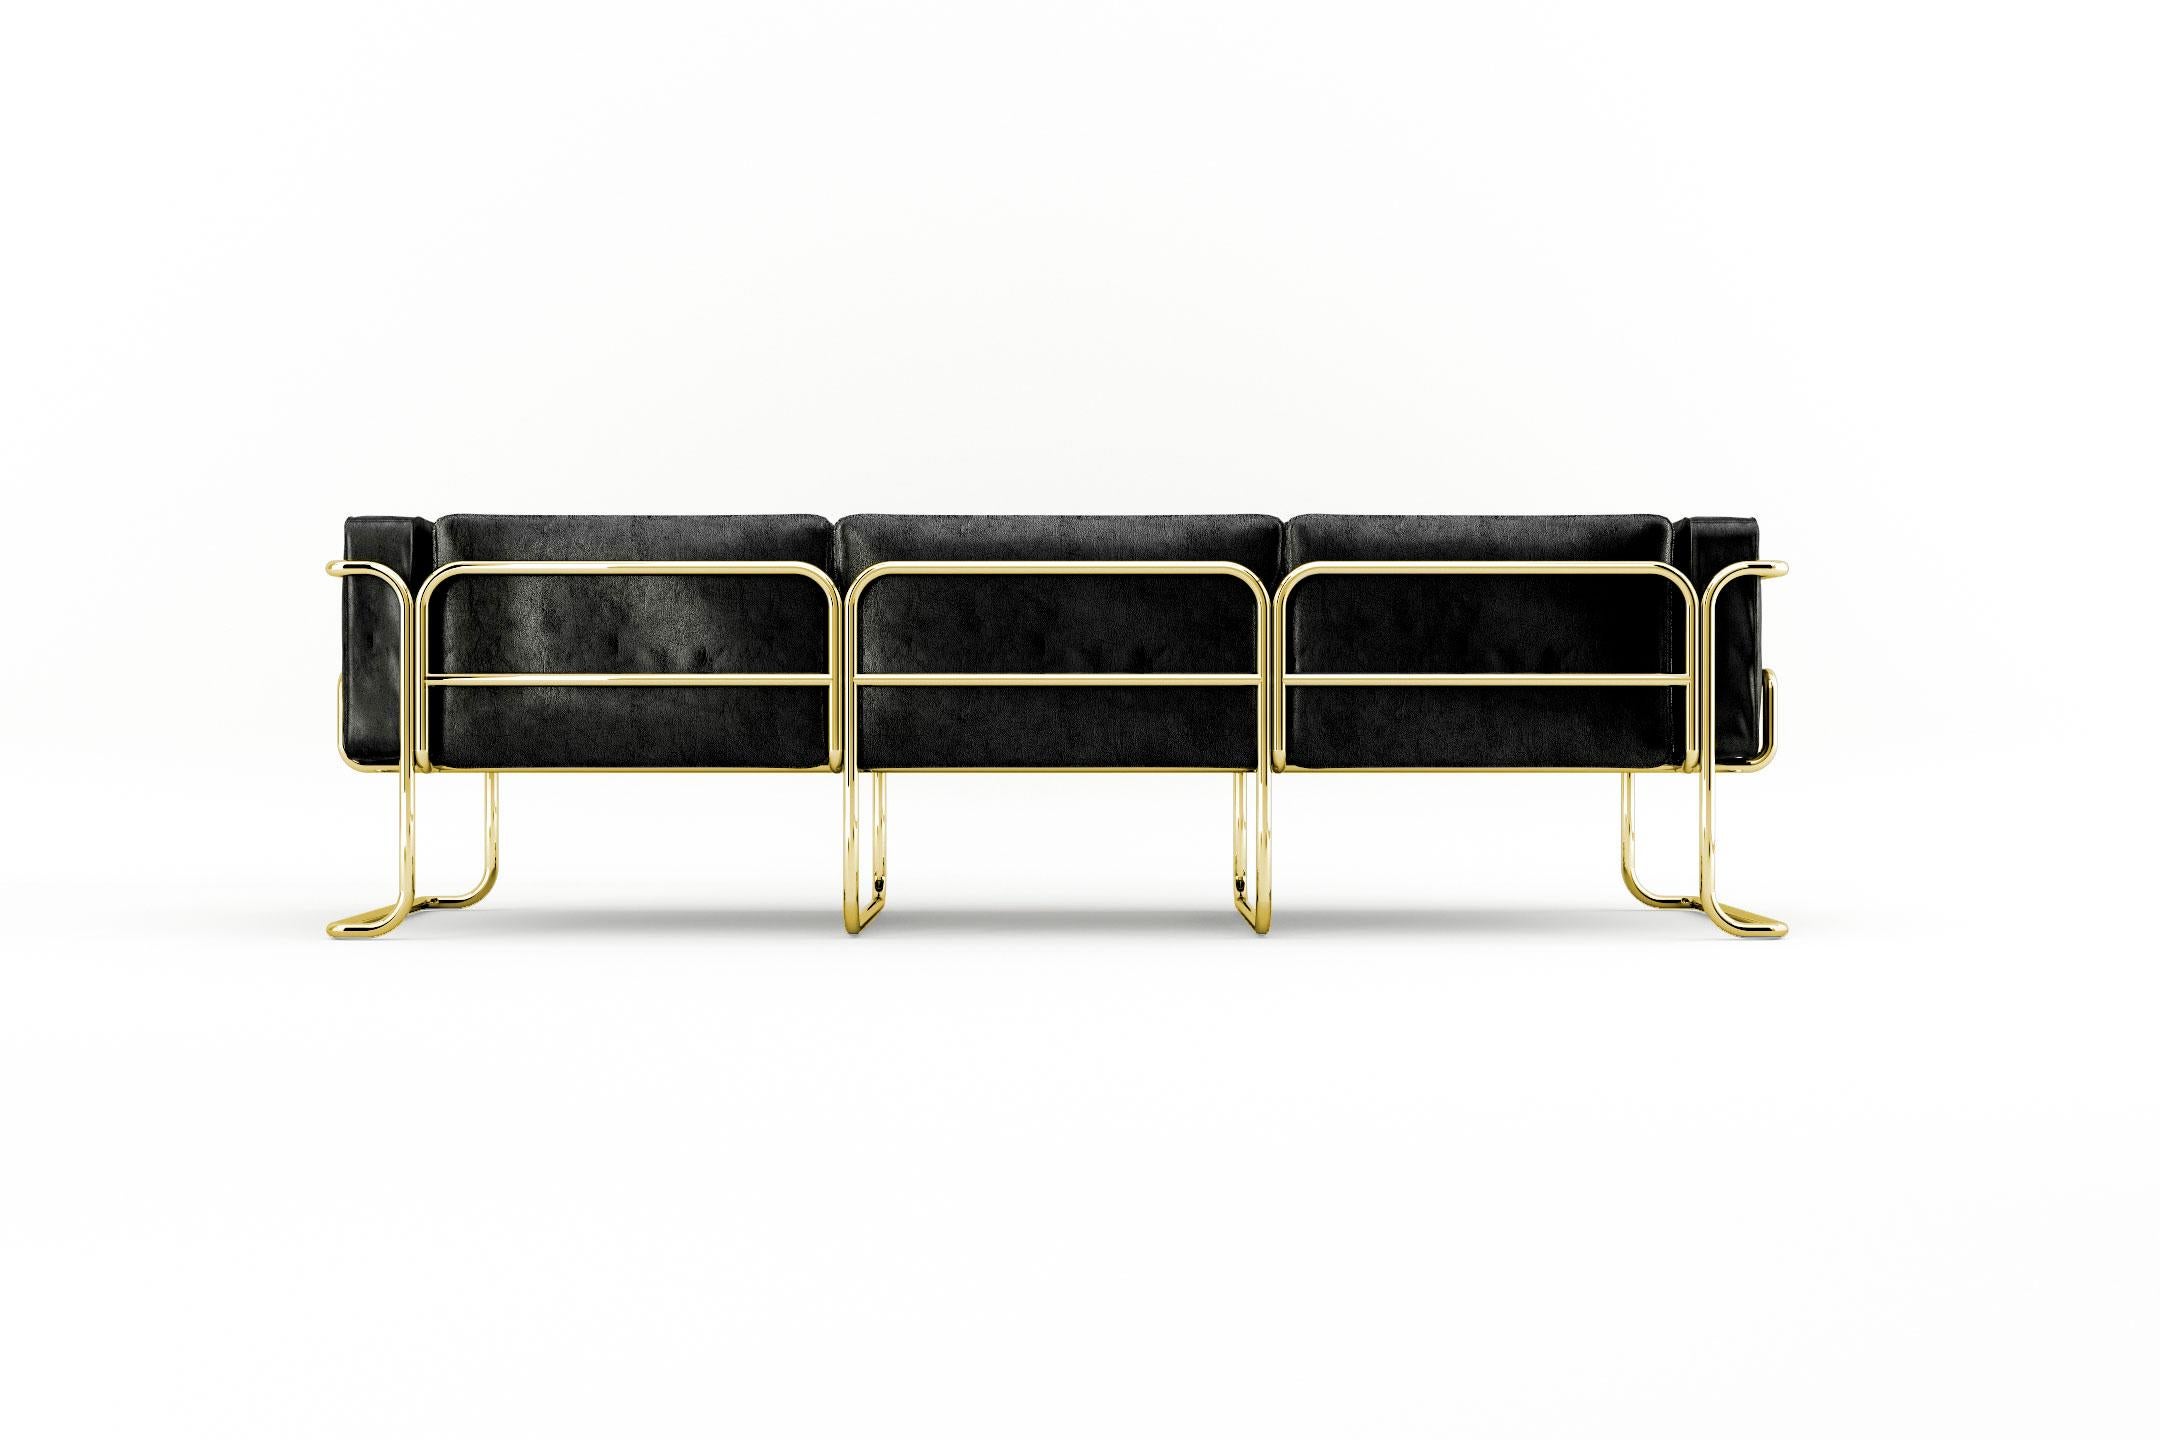 Lotus 3 Seat Sofa - Modern Black Leather Sofa with Brass Legs In New Condition For Sale In London, GB